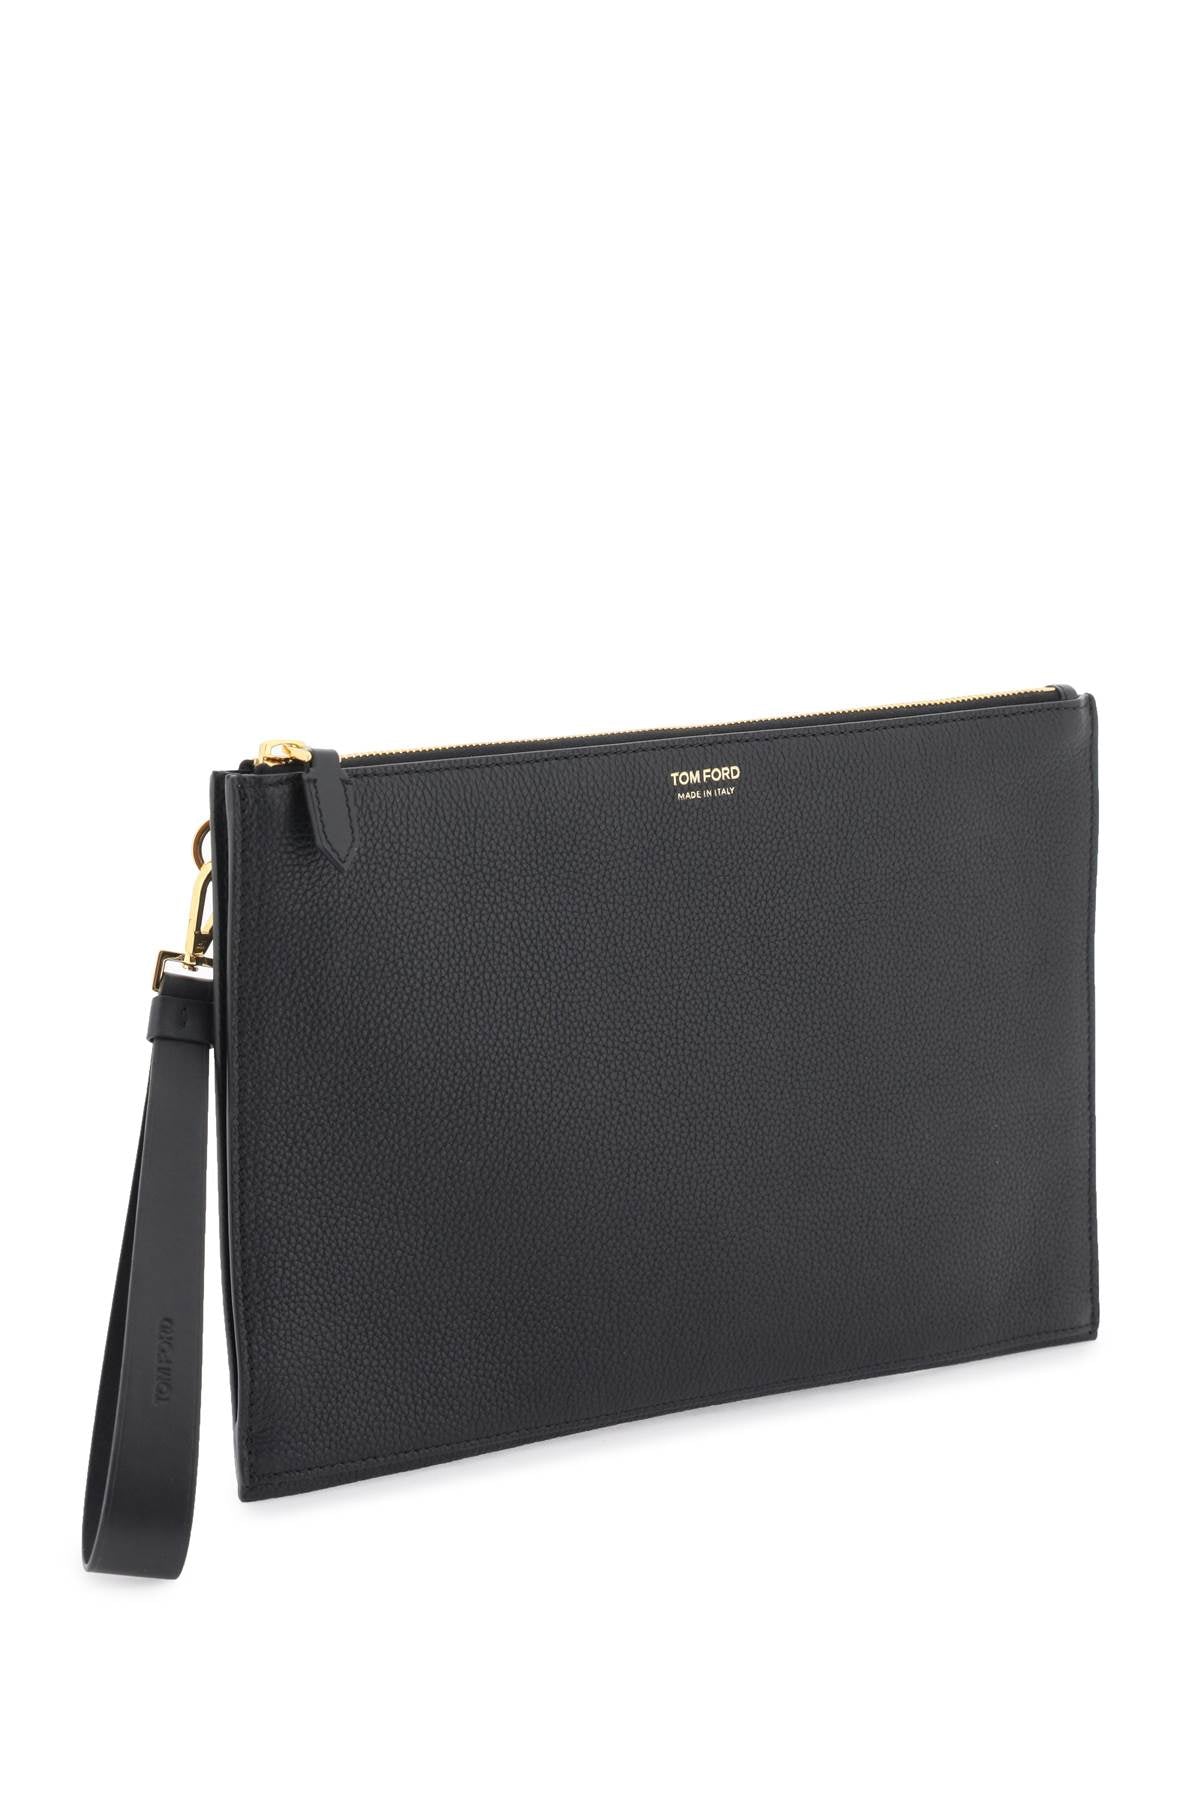 Tom Ford Tom ford grained leather pouch